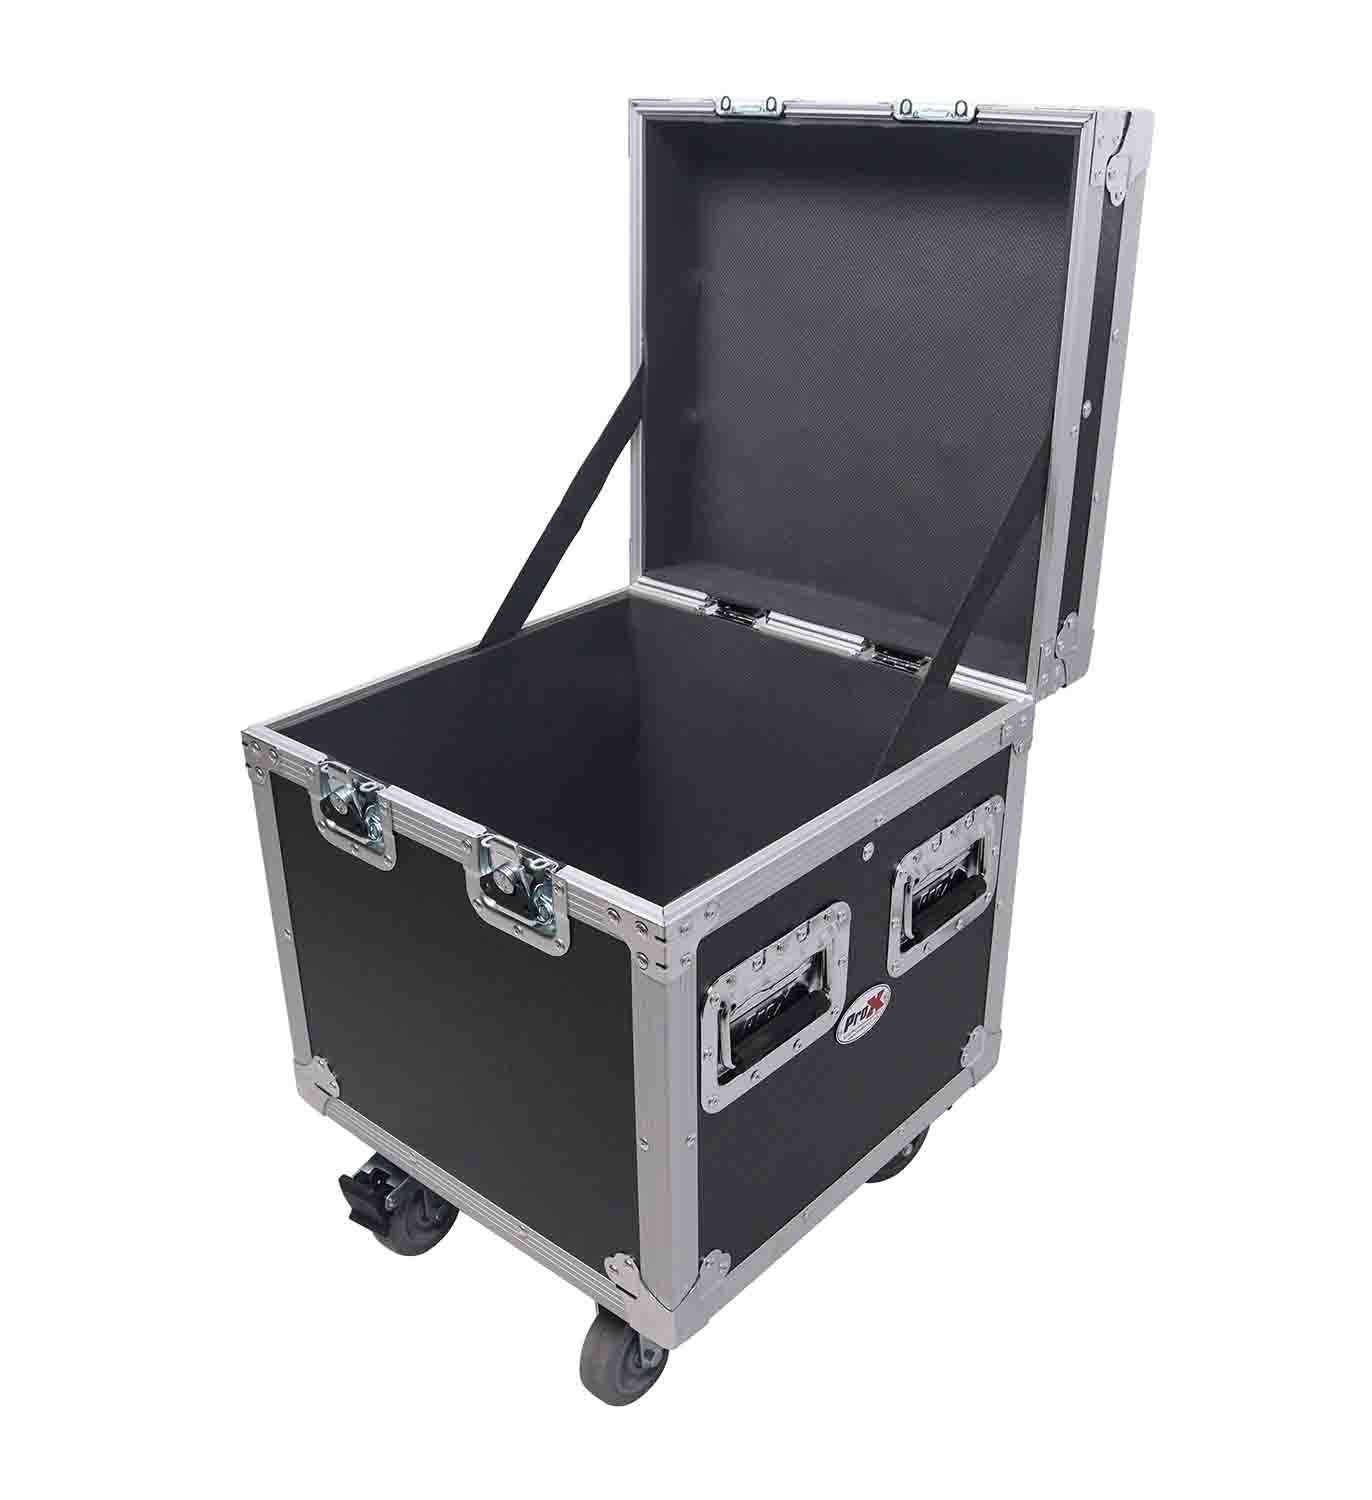 ProX XS-UTL17 ATA Utility Flight Travel Heavy-Duty Storage Road Case with 4-Inch in casters – 18"x18"x18' Exterior - Hollywood DJ